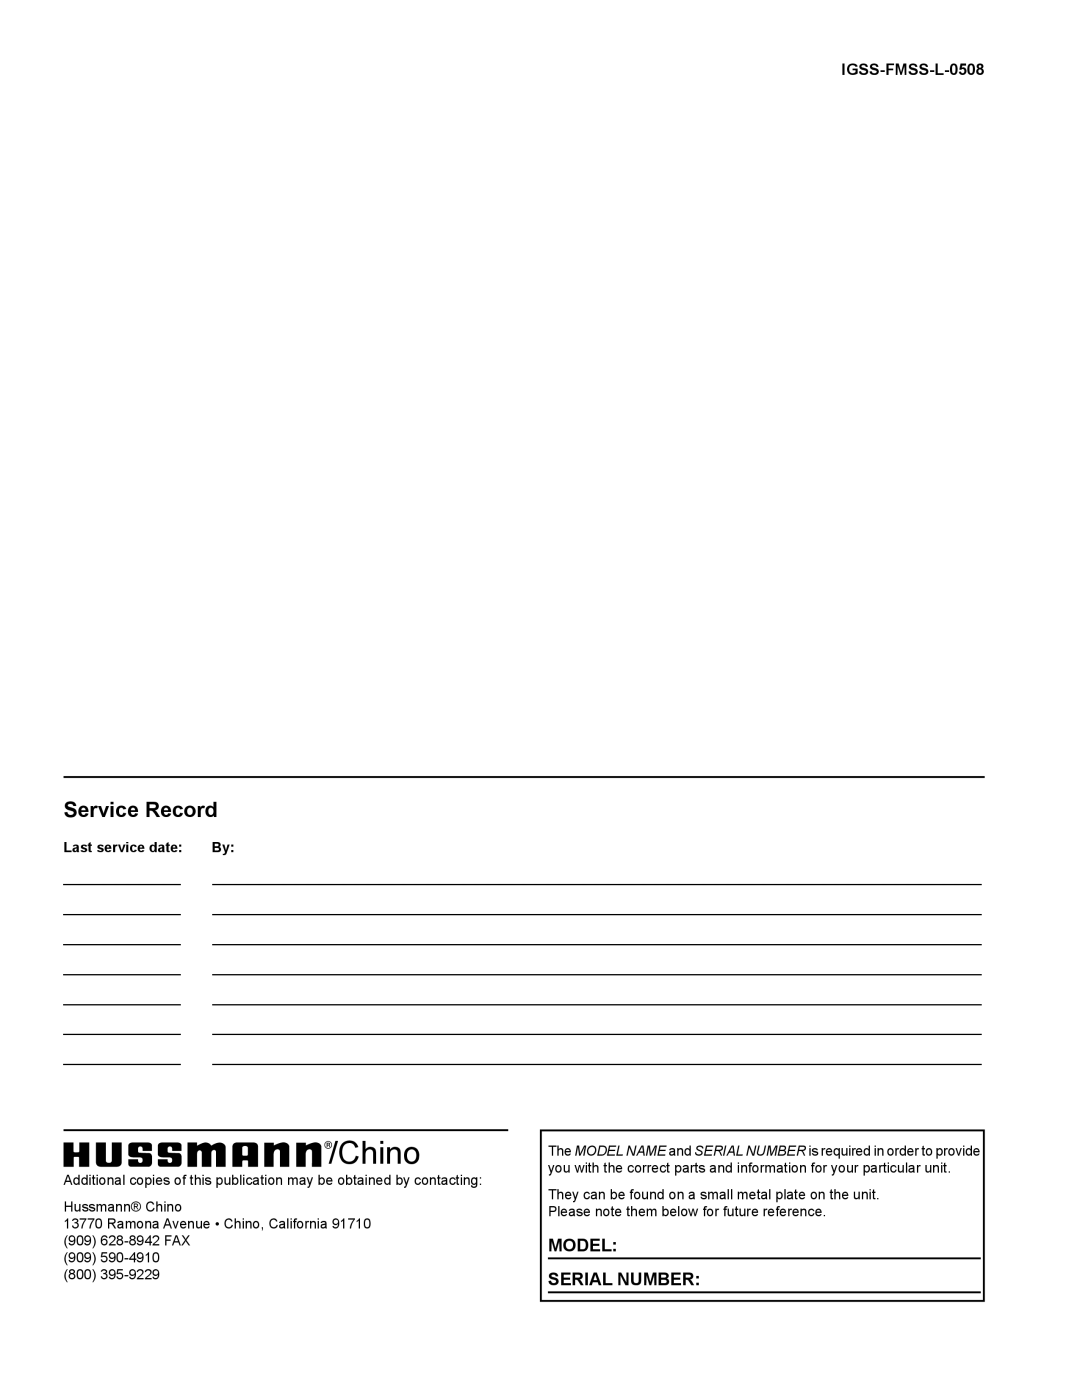 hussman operation manual Chino, Service Record, Model Serial Number, IGSS-FMSS-L-0508, Last service date 